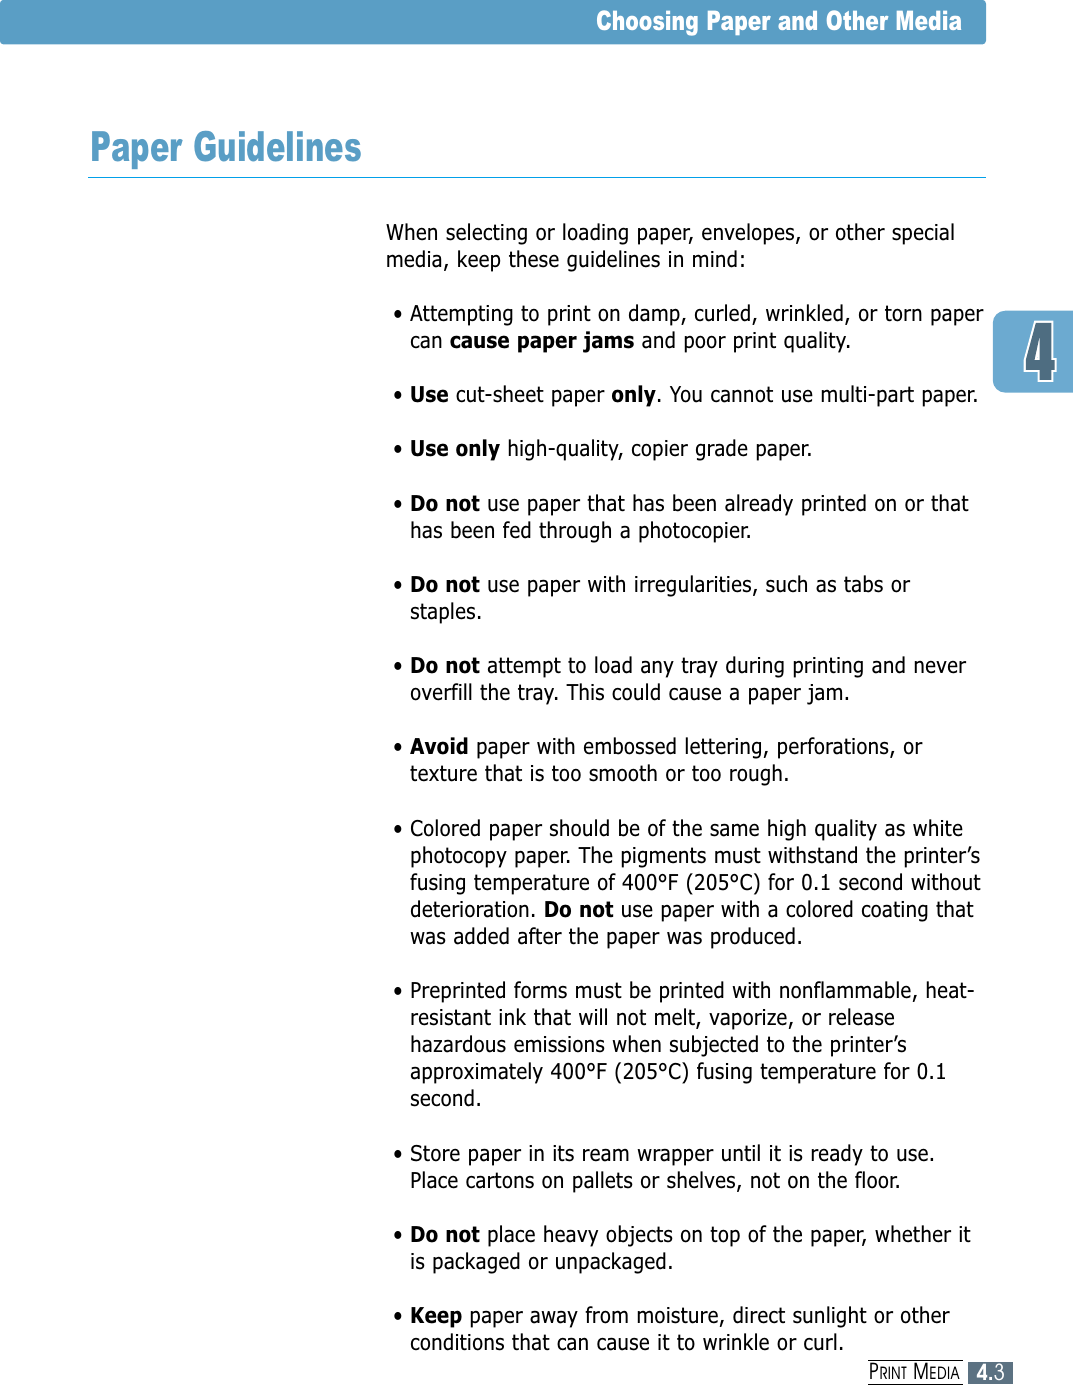 When selecting or loading paper, envelopes, or other specialmedia, keep these guidelines in mind:• Attempting to print on damp, curled, wrinkled, or torn papercan cause paper jams and poor print quality.• Use cut-sheet paper only. You cannot use multi-part paper.• Use only high-quality, copier grade paper. • Do not use paper that has been already printed on or thathas been fed through a photocopier.• Do not use paper with irregularities, such as tabs orstaples.• Do not attempt to load any tray during printing and neveroverfill the tray. This could cause a paper jam.• Avoid paper with embossed lettering, perforations, ortexture that is too smooth or too rough.• Colored paper should be of the same high quality as whitephotocopy paper. The pigments must withstand the printer’sfusing temperature of 400°F (205°C) for 0.1 second withoutdeterioration. Do not use paper with a colored coating thatwas added after the paper was produced.• Preprinted forms must be printed with nonflammable, heat-resistant ink that will not melt, vaporize, or releasehazardous emissions when subjected to the printer’sapproximately 400°F (205°C) fusing temperature for 0.1second.• Store paper in its ream wrapper until it is ready to use.Place cartons on pallets or shelves, not on the floor. • Do not place heavy objects on top of the paper, whether itis packaged or unpackaged. • Keep paper away from moisture, direct sunlight or otherconditions that can cause it to wrinkle or curl.4.3PRINT MEDIAChoosing Paper and Other MediaPaper Guidelines